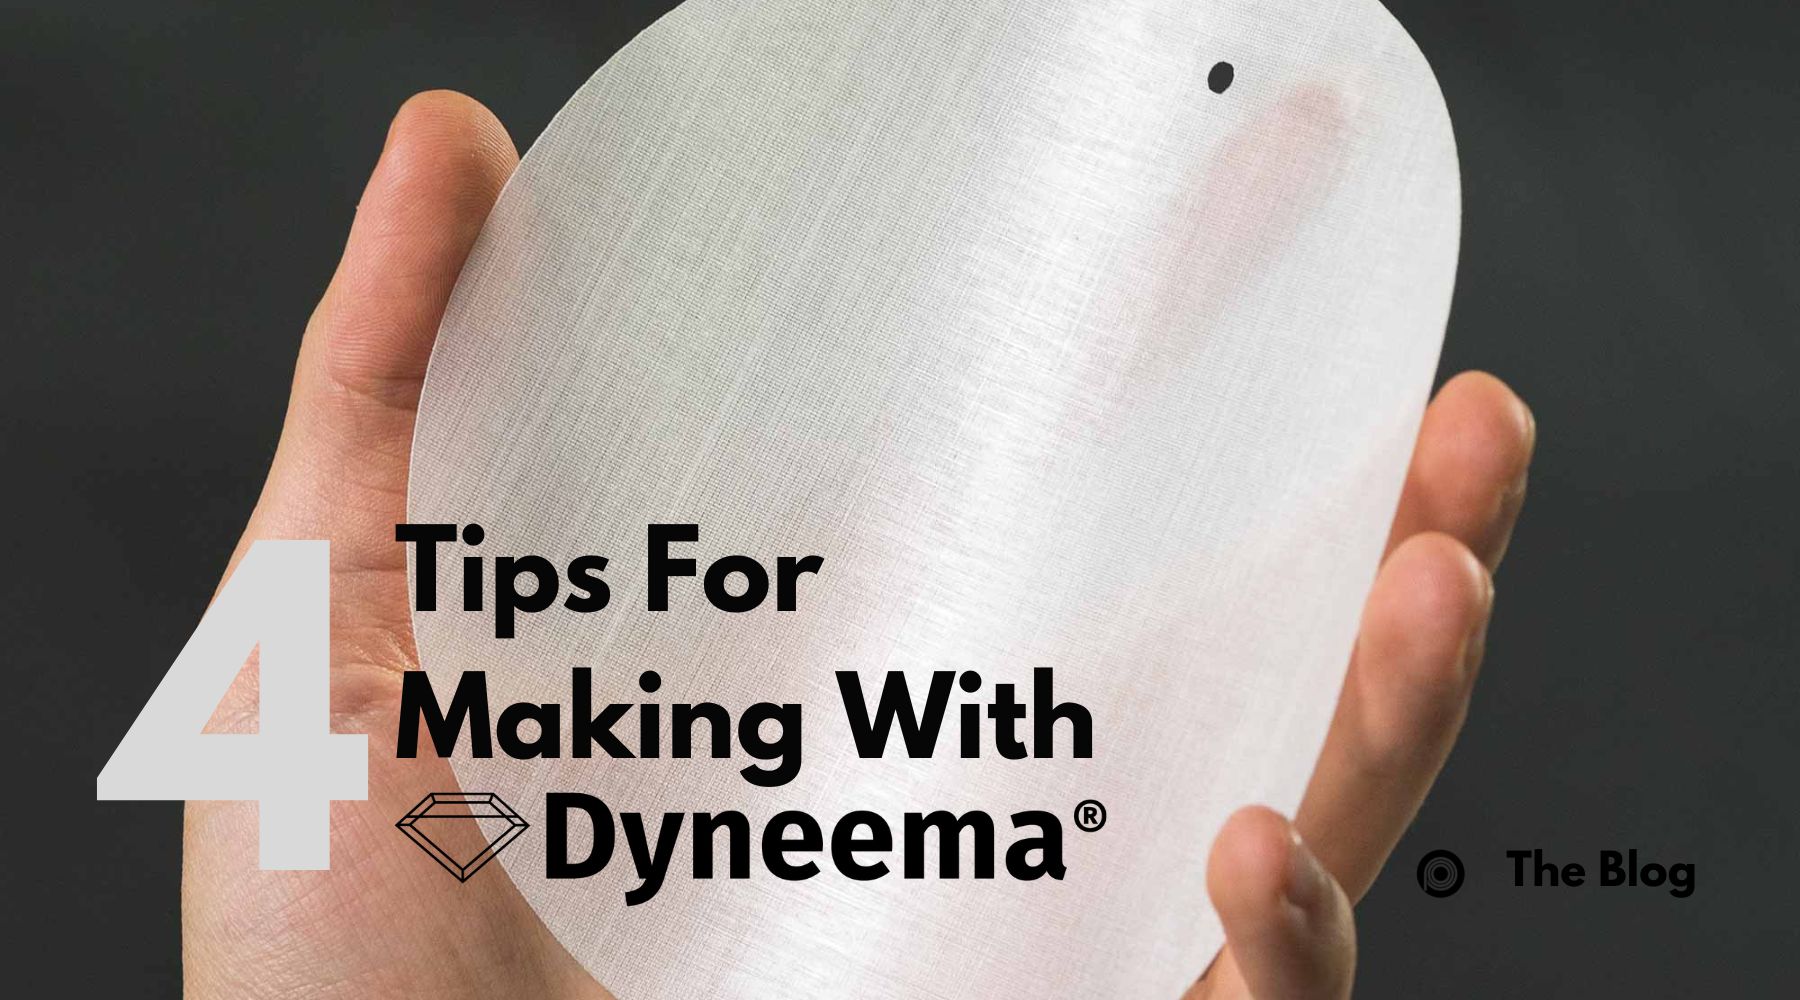 Tips for Making with Dyneema